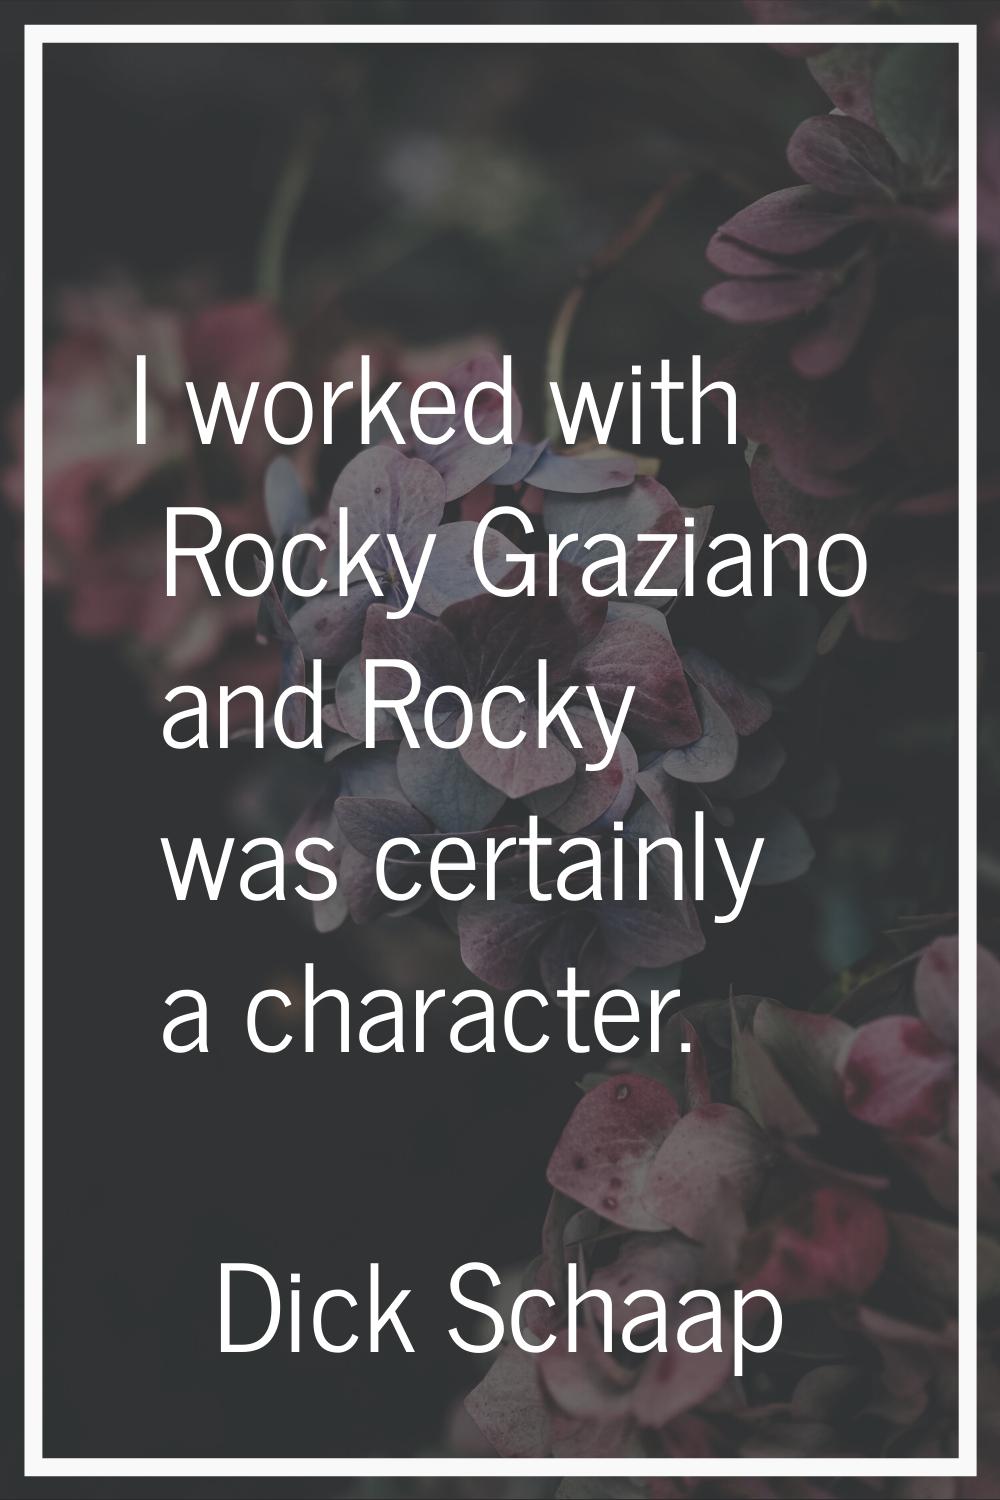 I worked with Rocky Graziano and Rocky was certainly a character.